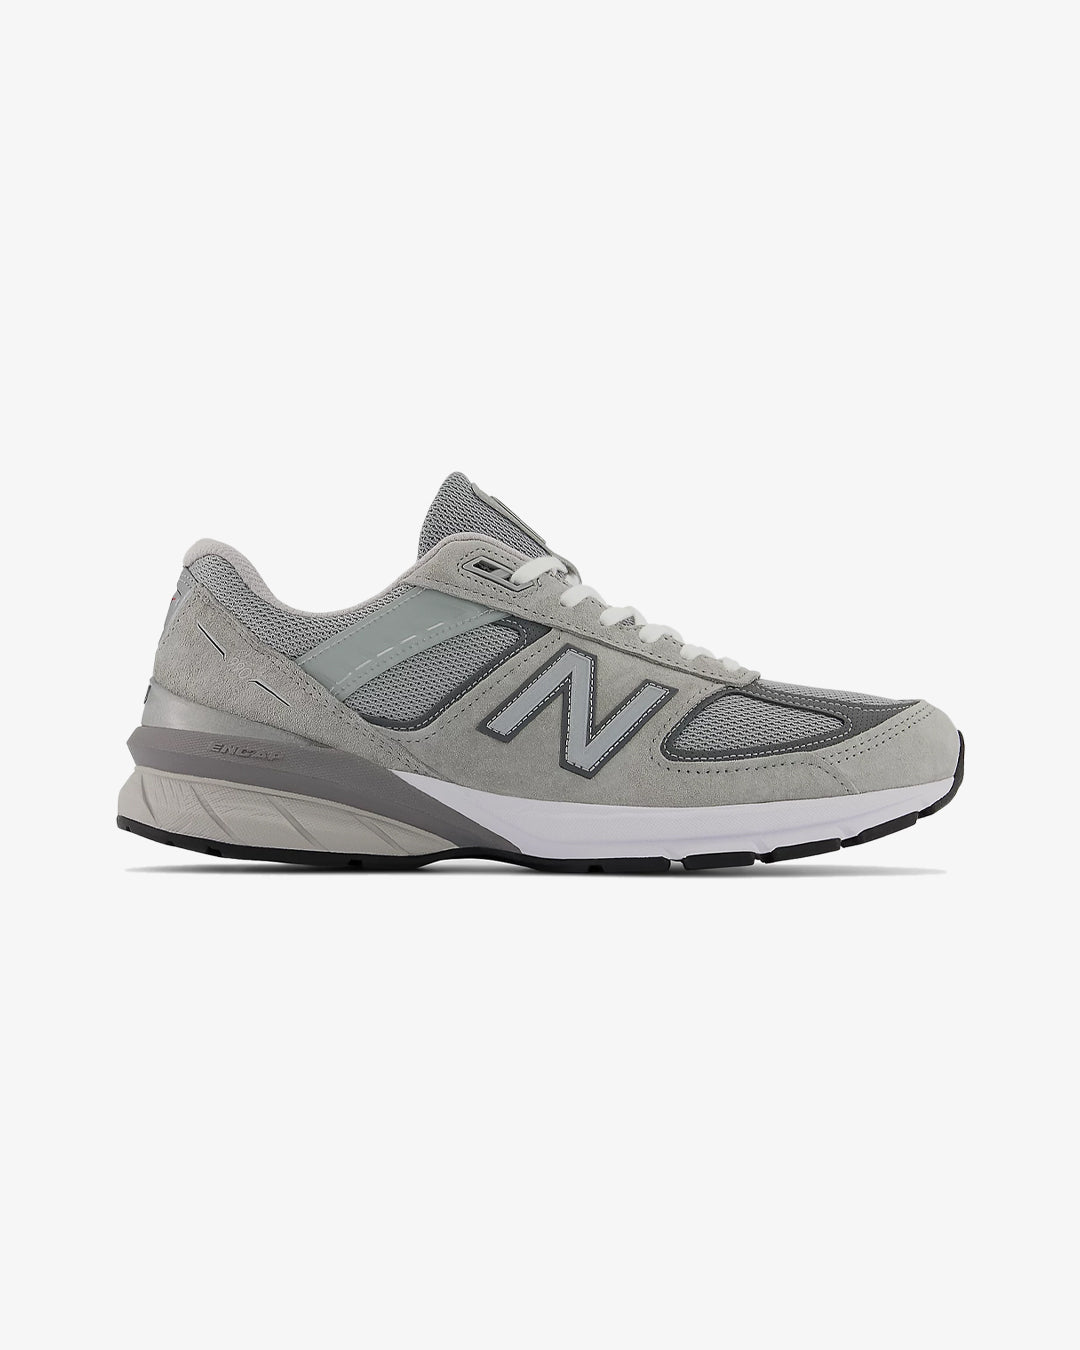 New Balance Made in USA 990v5 Core